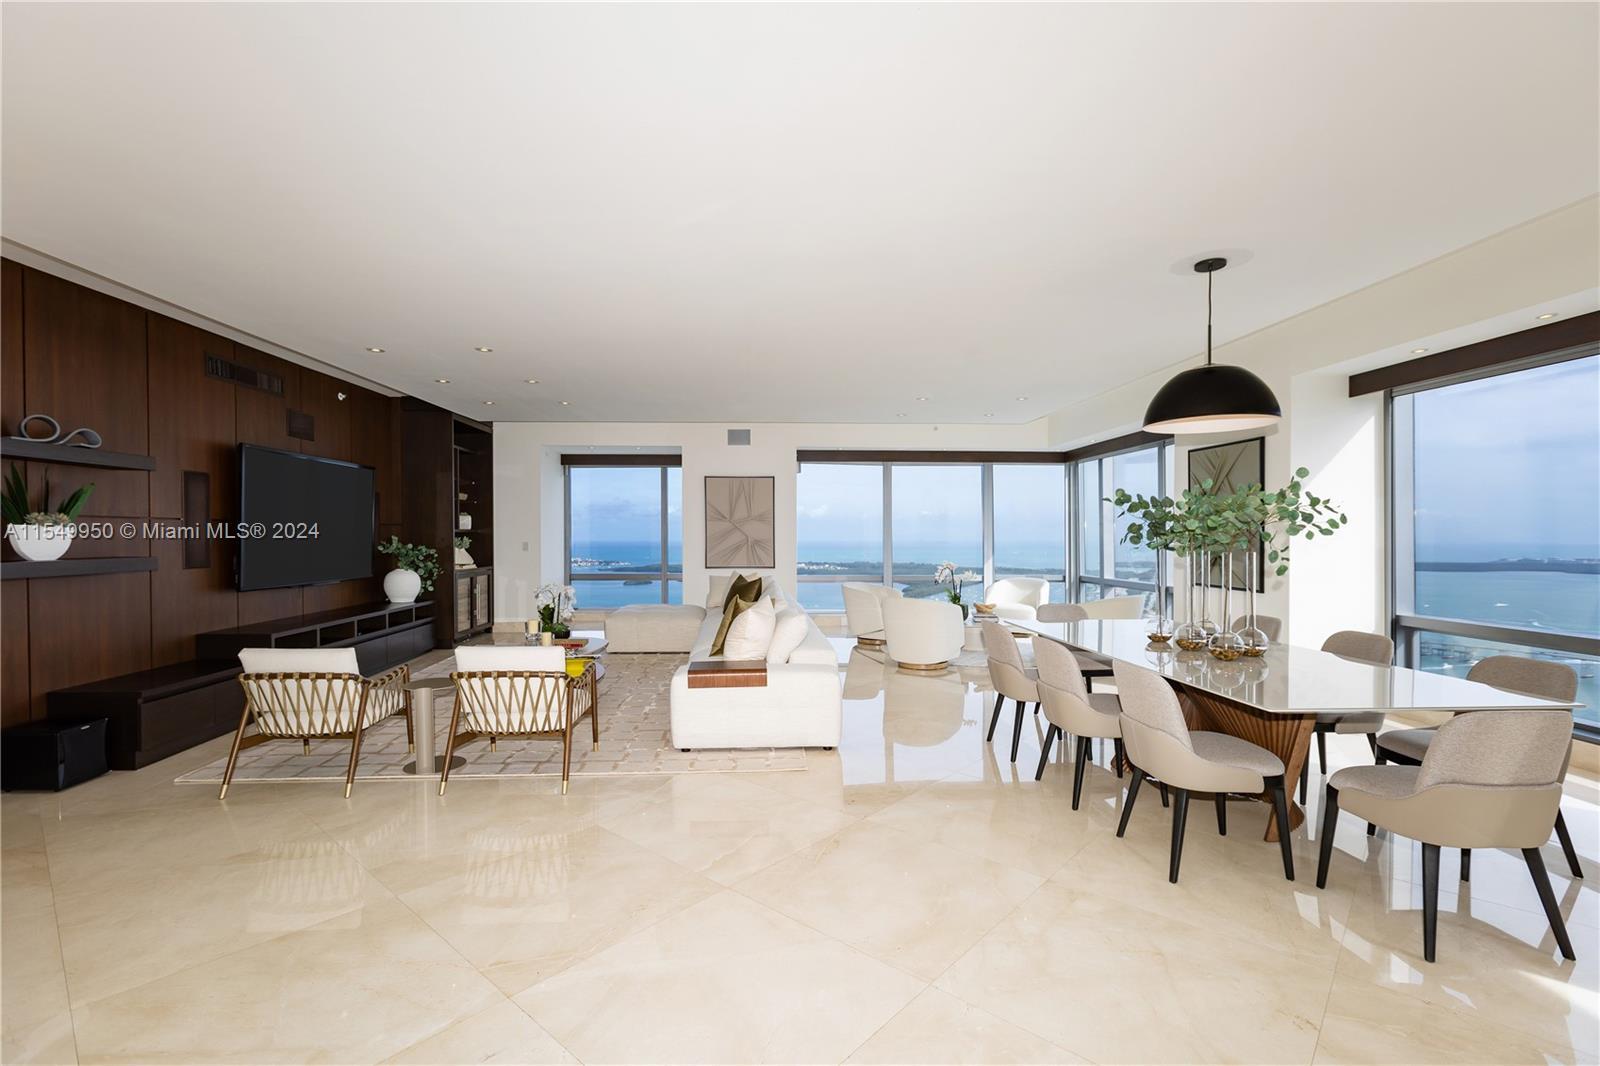 Magnificent Corner Residence unobstructed panoramic ocean and bay views from Key Biscayne to Miami B